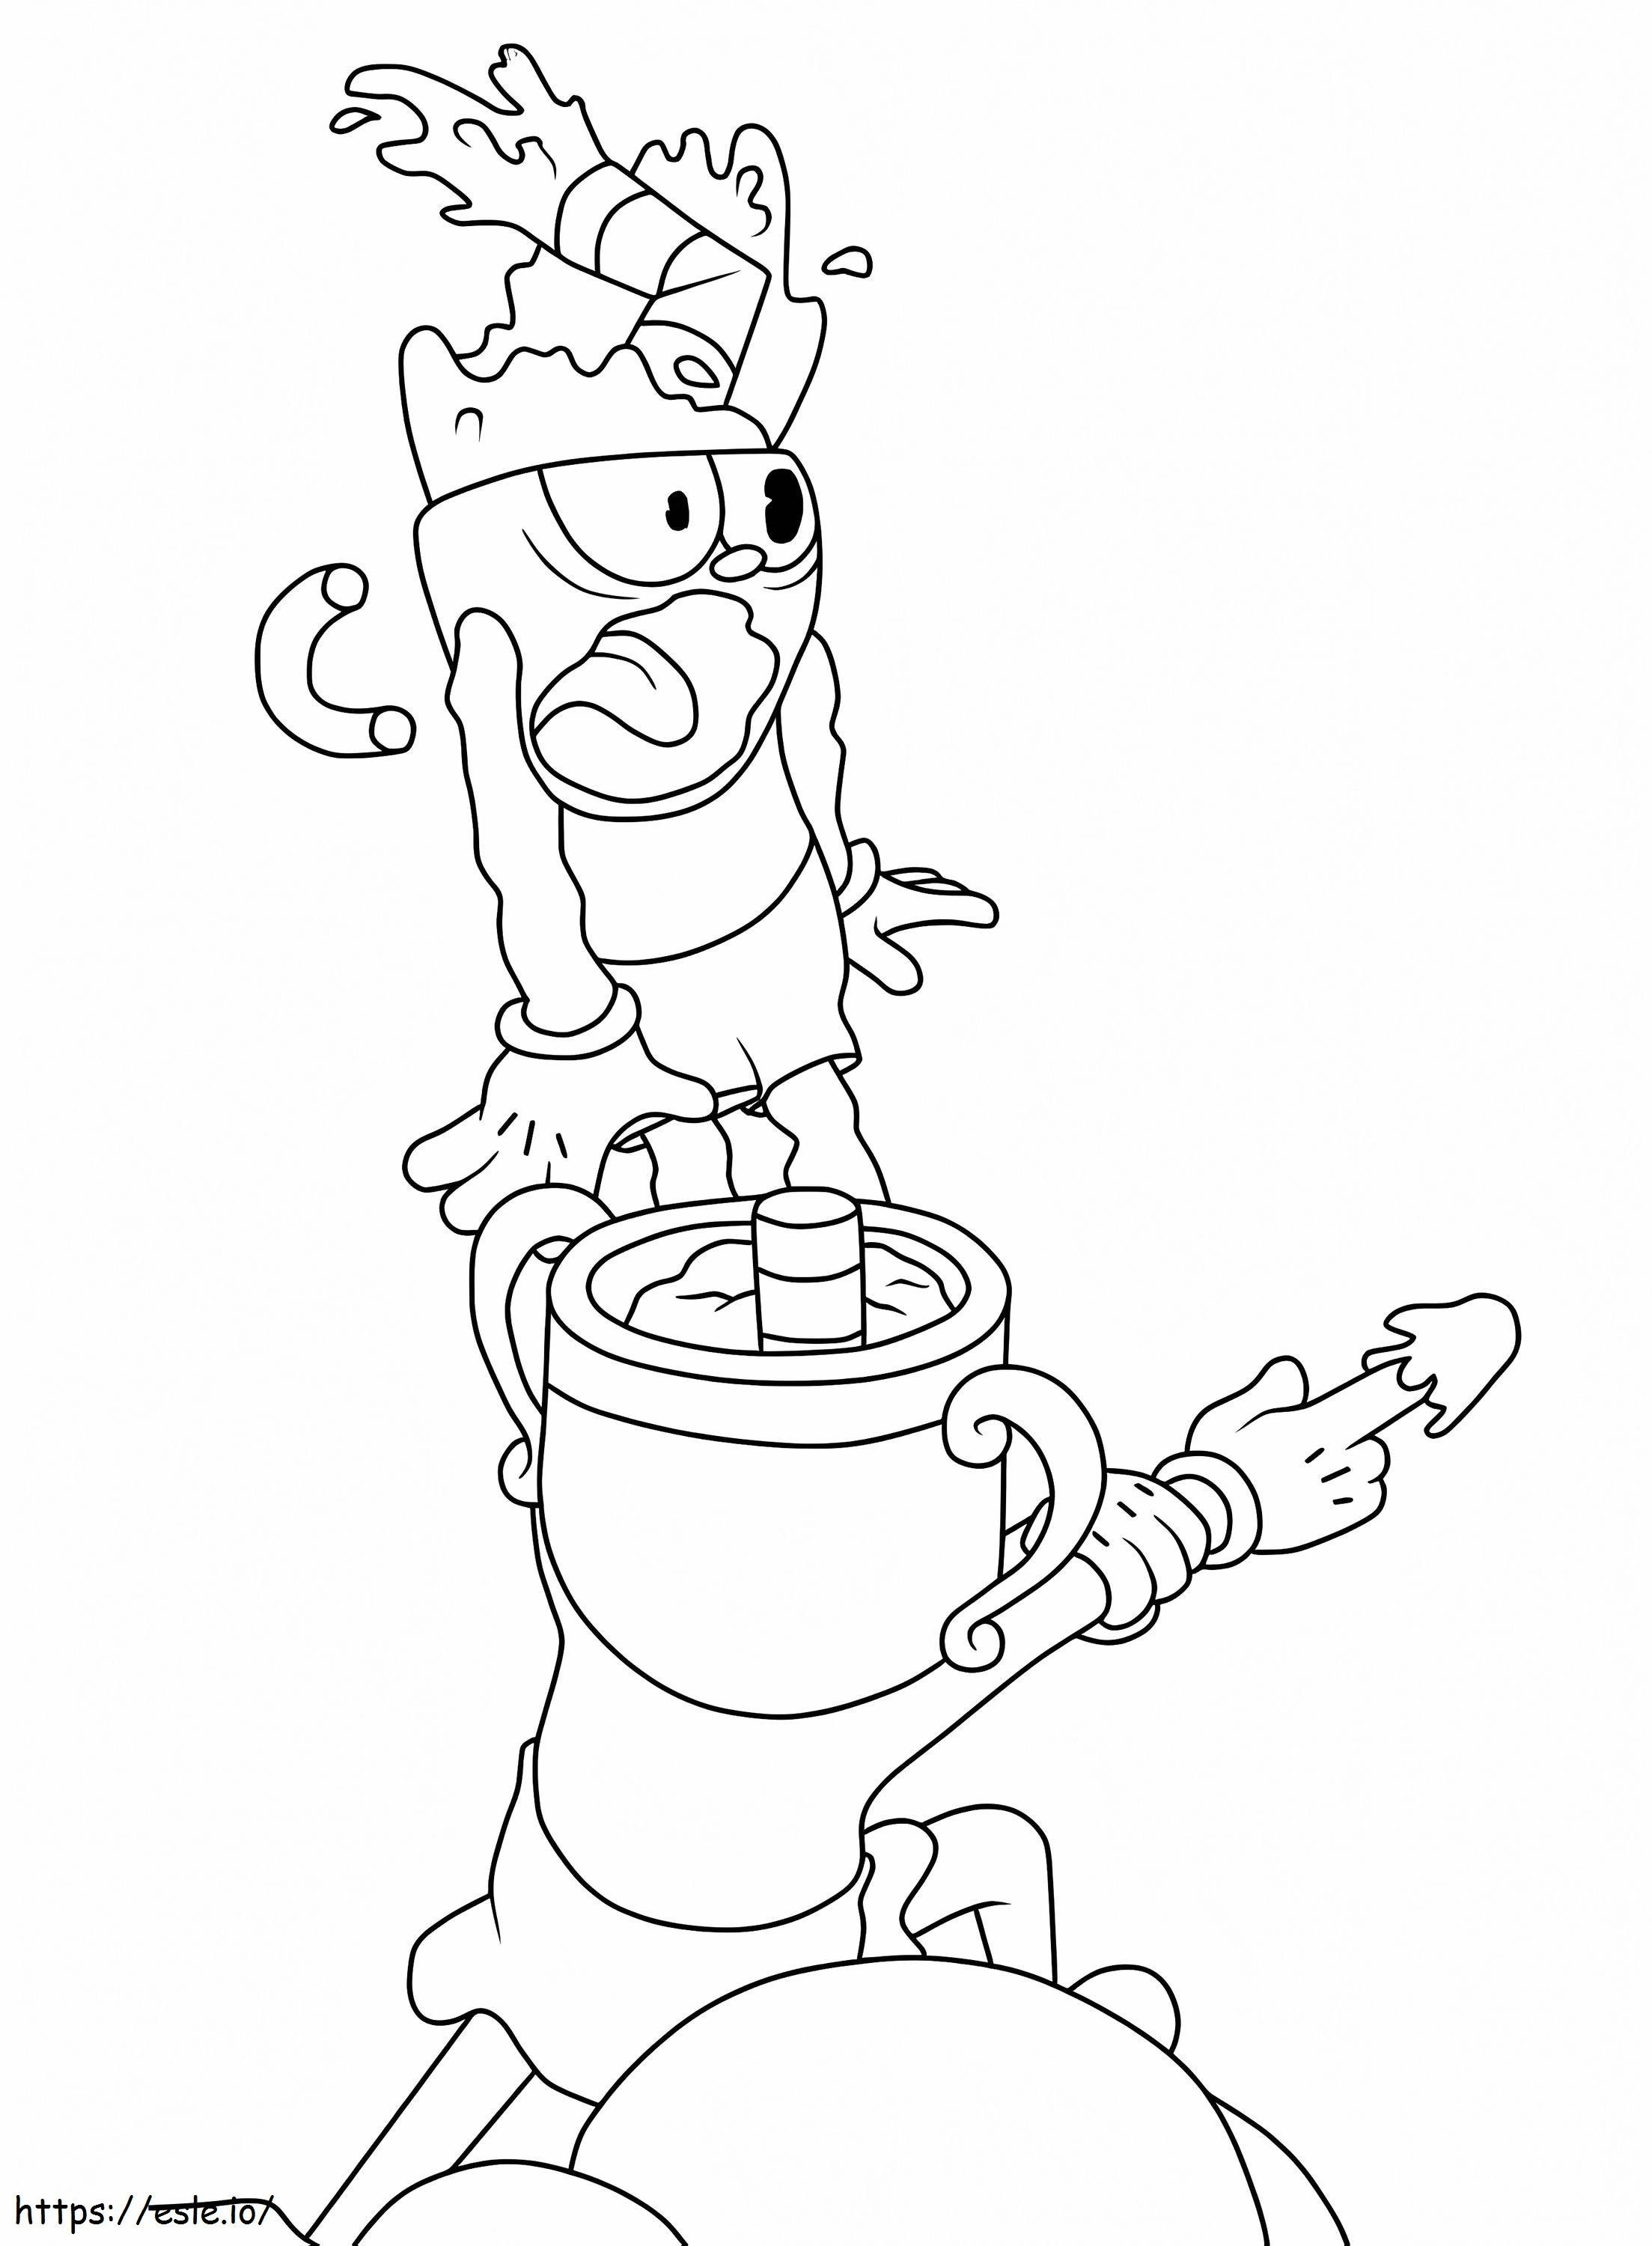 Cuphead Boss War coloring page